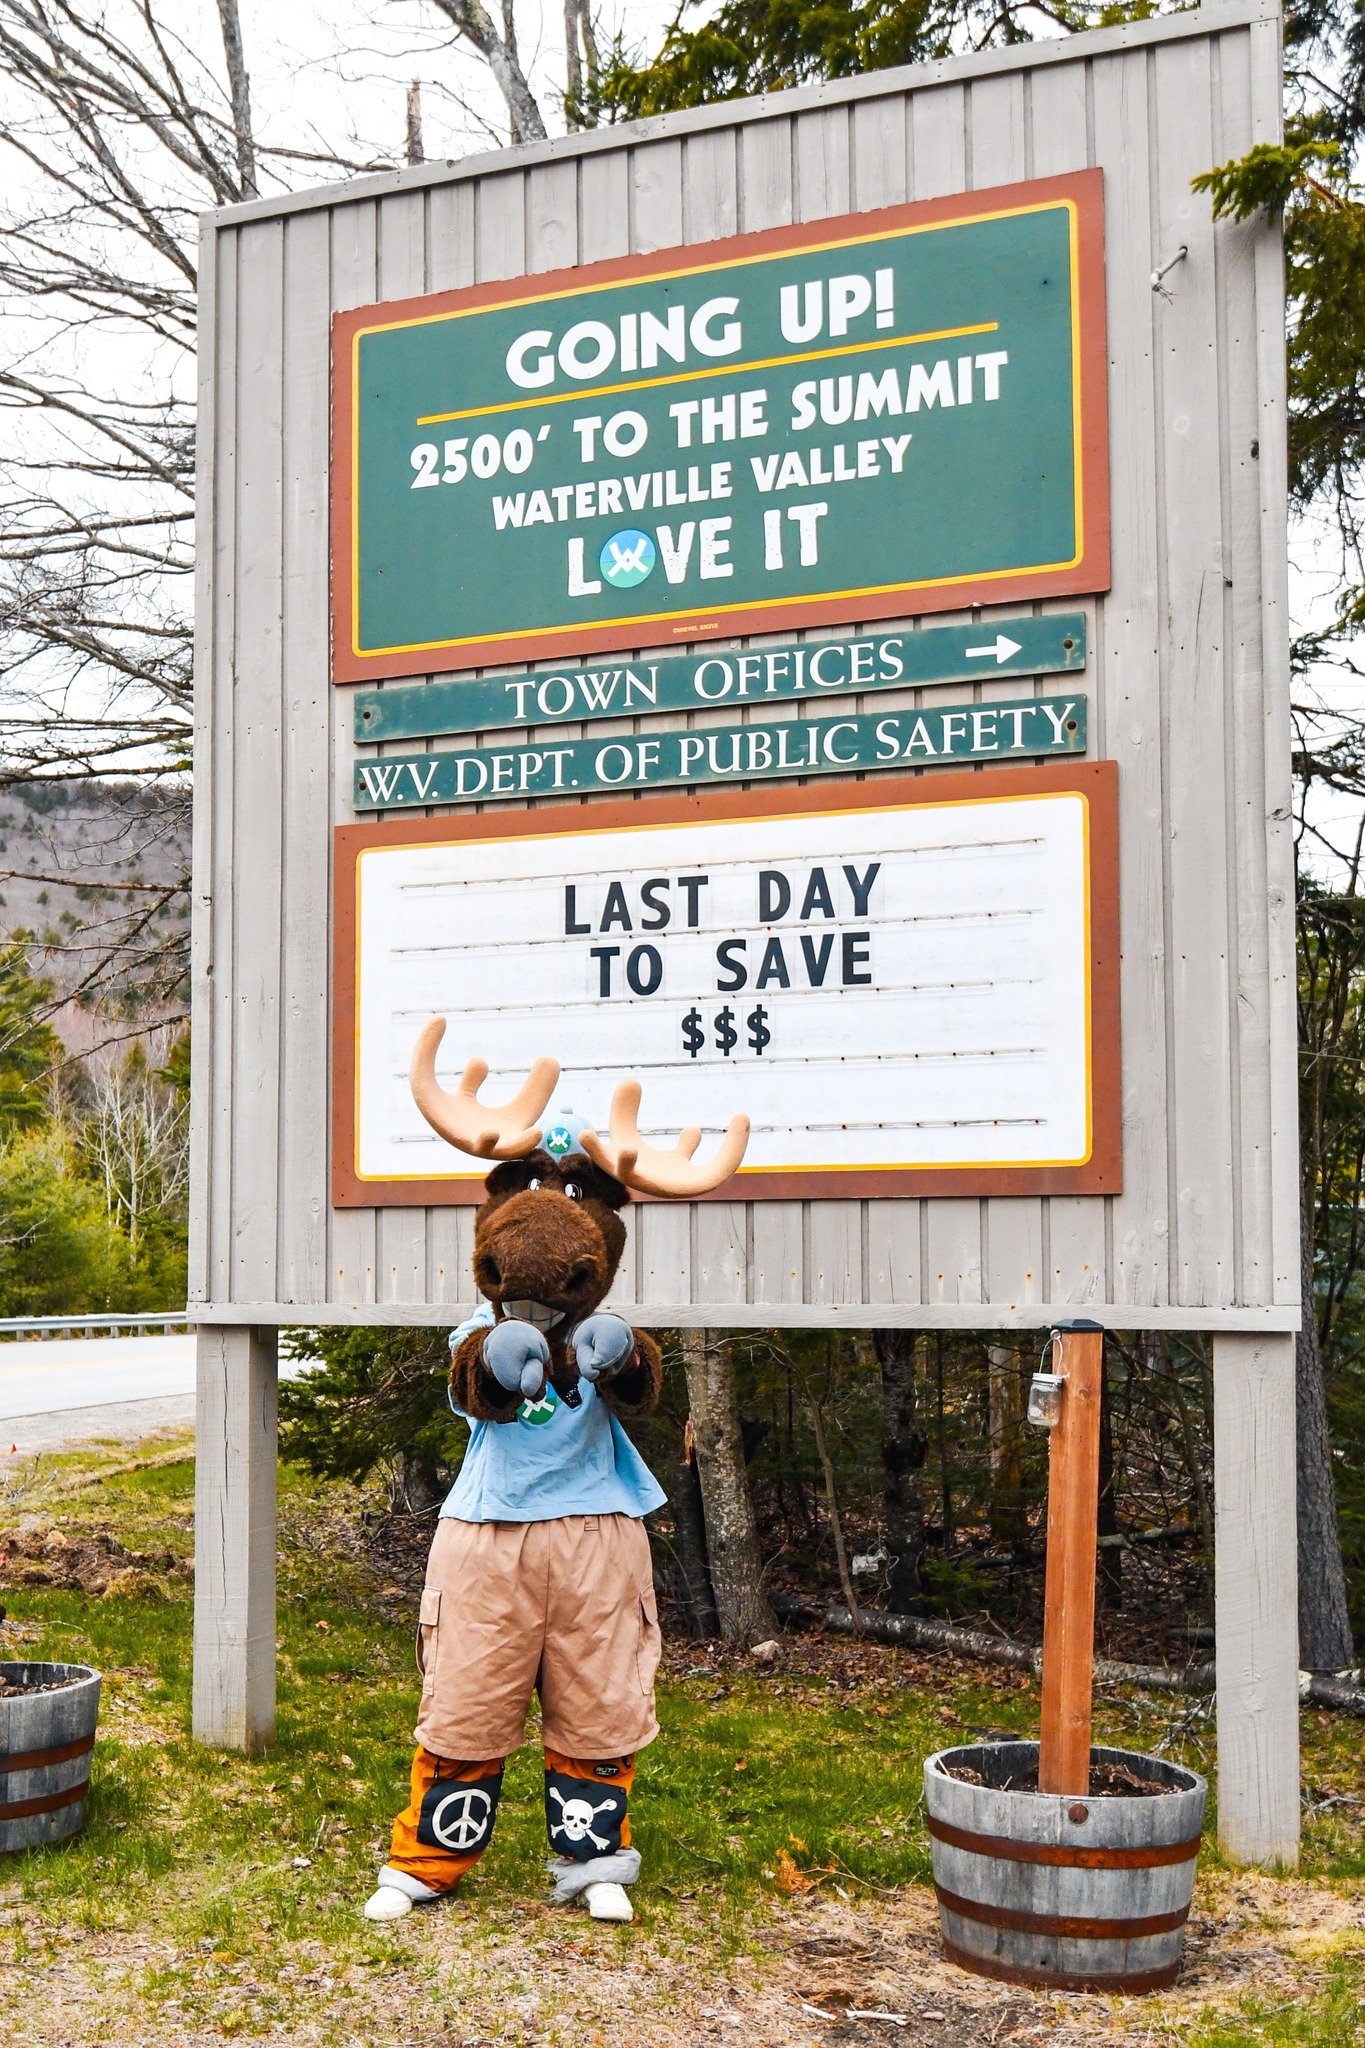 Don't miss the deadline! Less than 24 hours left to snag your season pass at its lowest price! 

Sale perks end at midnight! Don't miss out on summer chairlift access, exclusive lodging discounts, 10% off renewals, and the Kids Ski Free deal with the